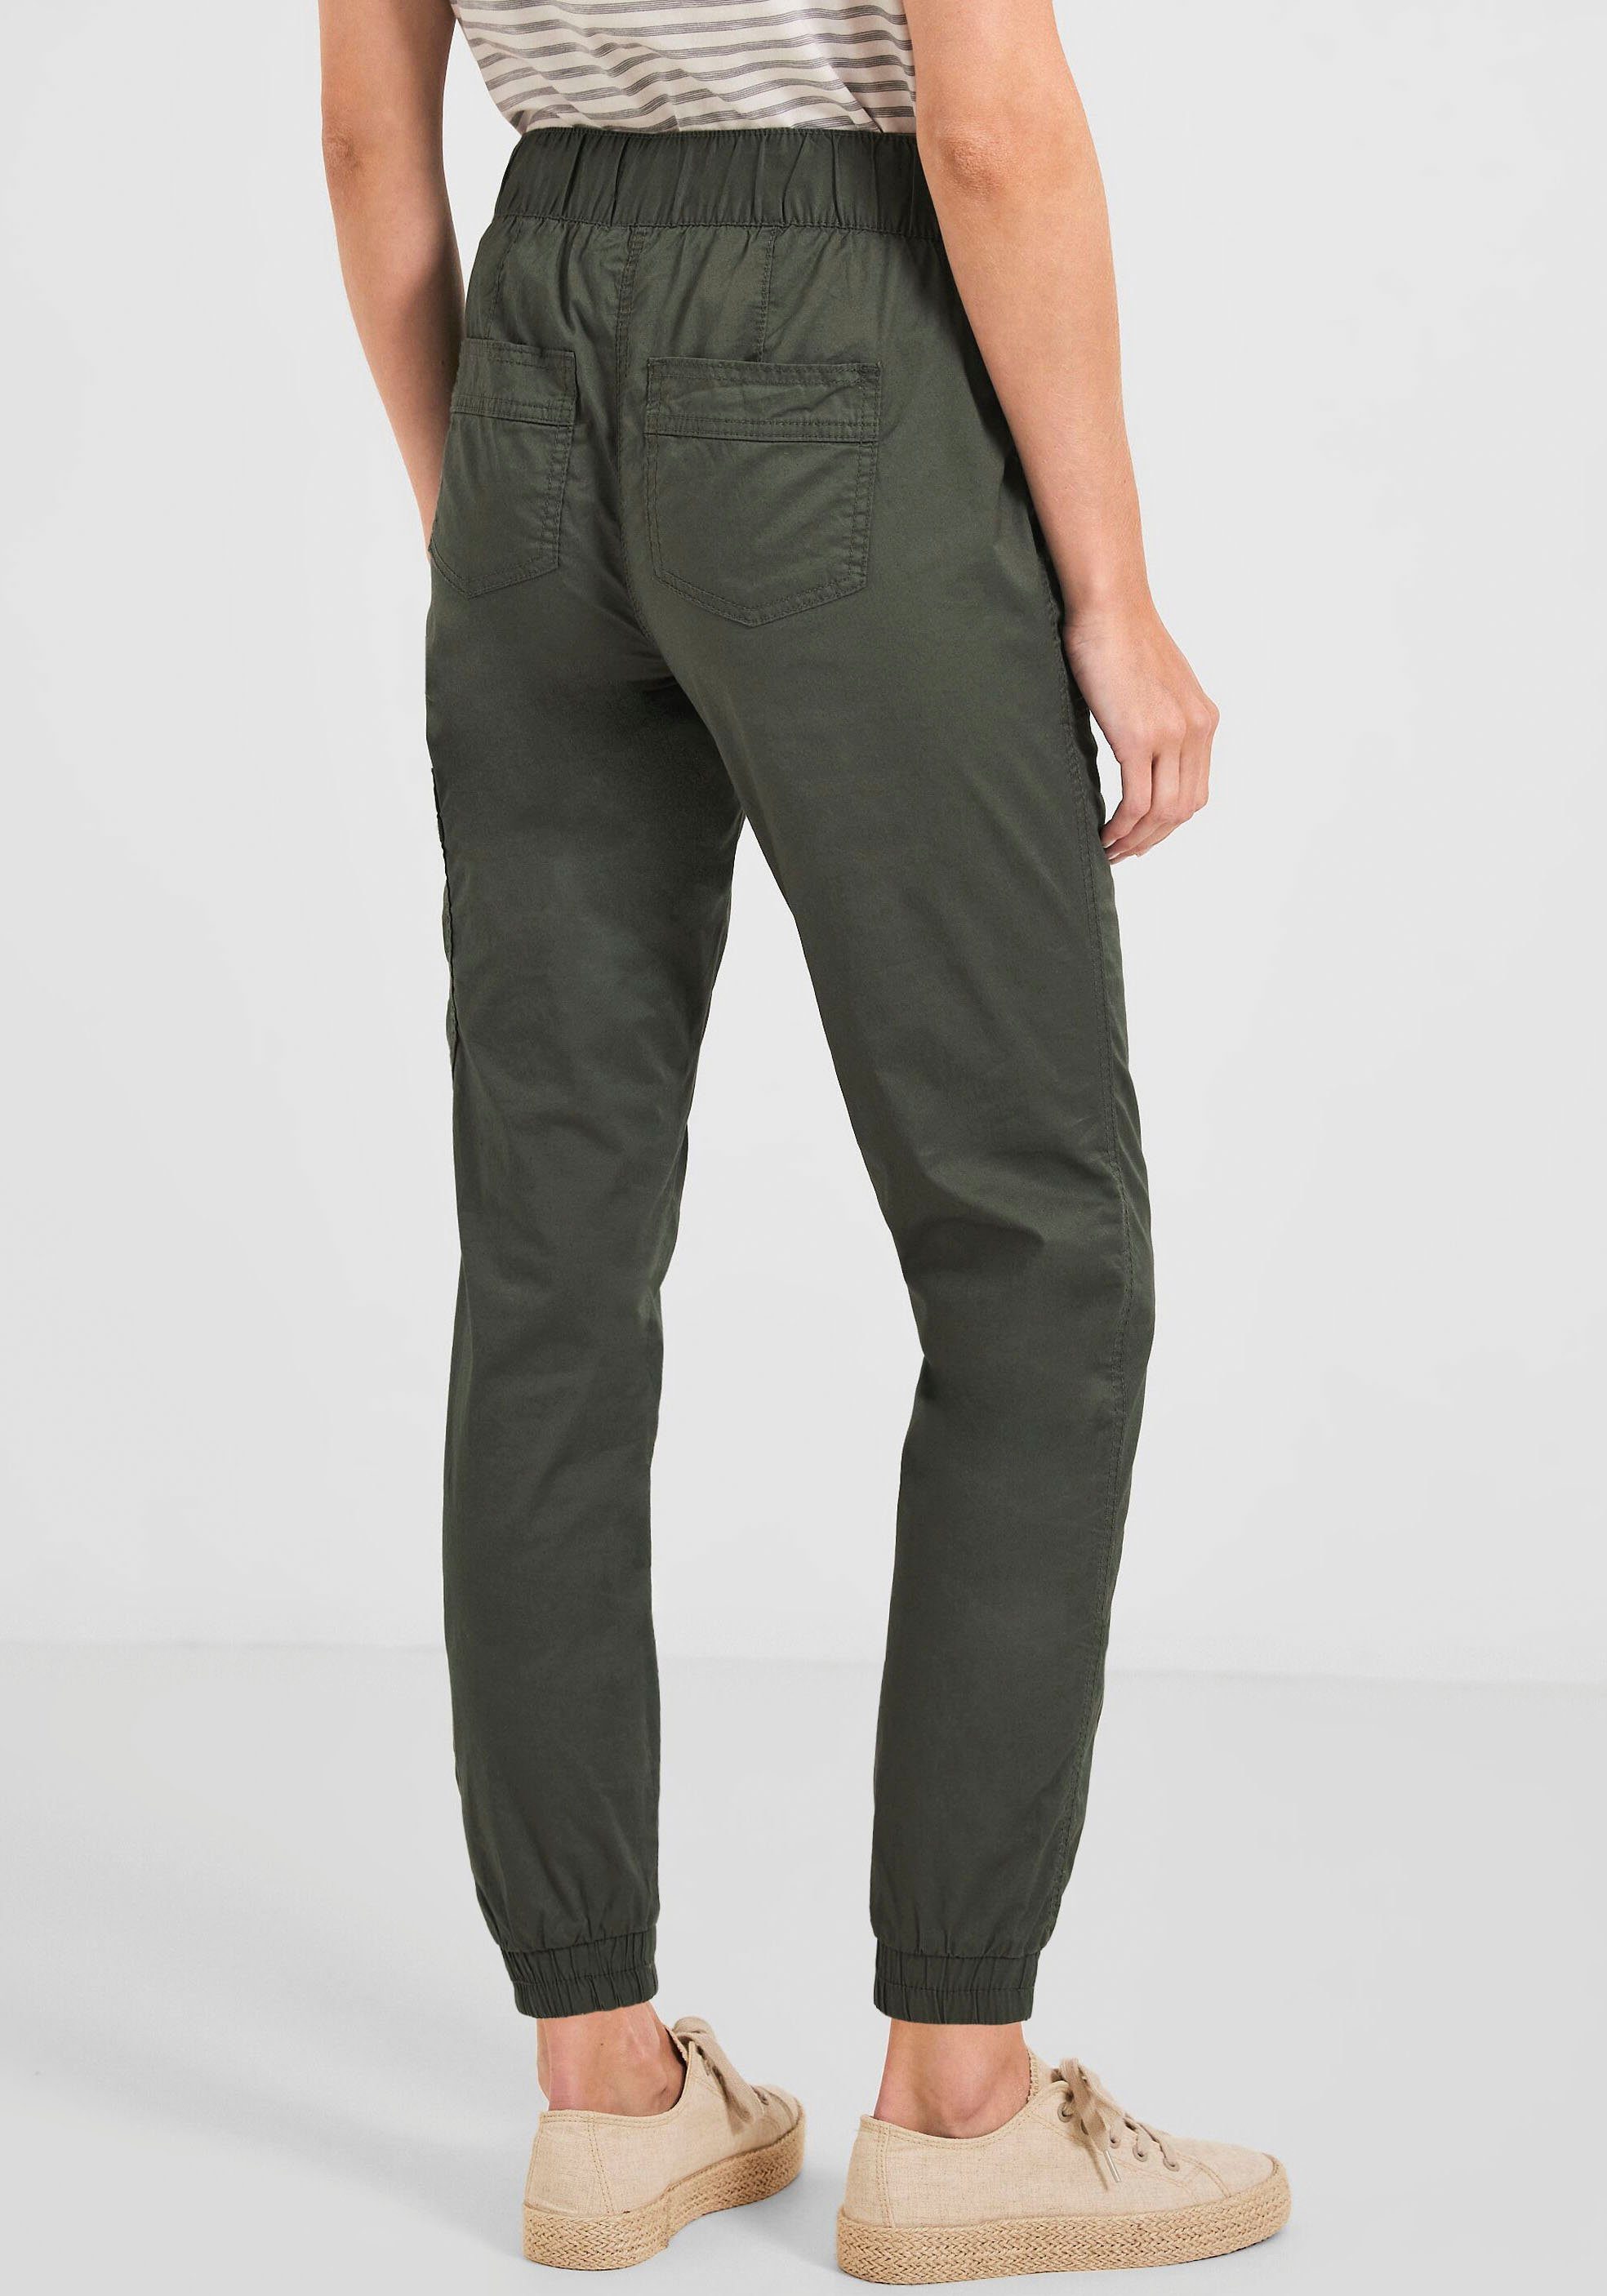 Cecil Style Tracey sporty im Outdoorhose khaki